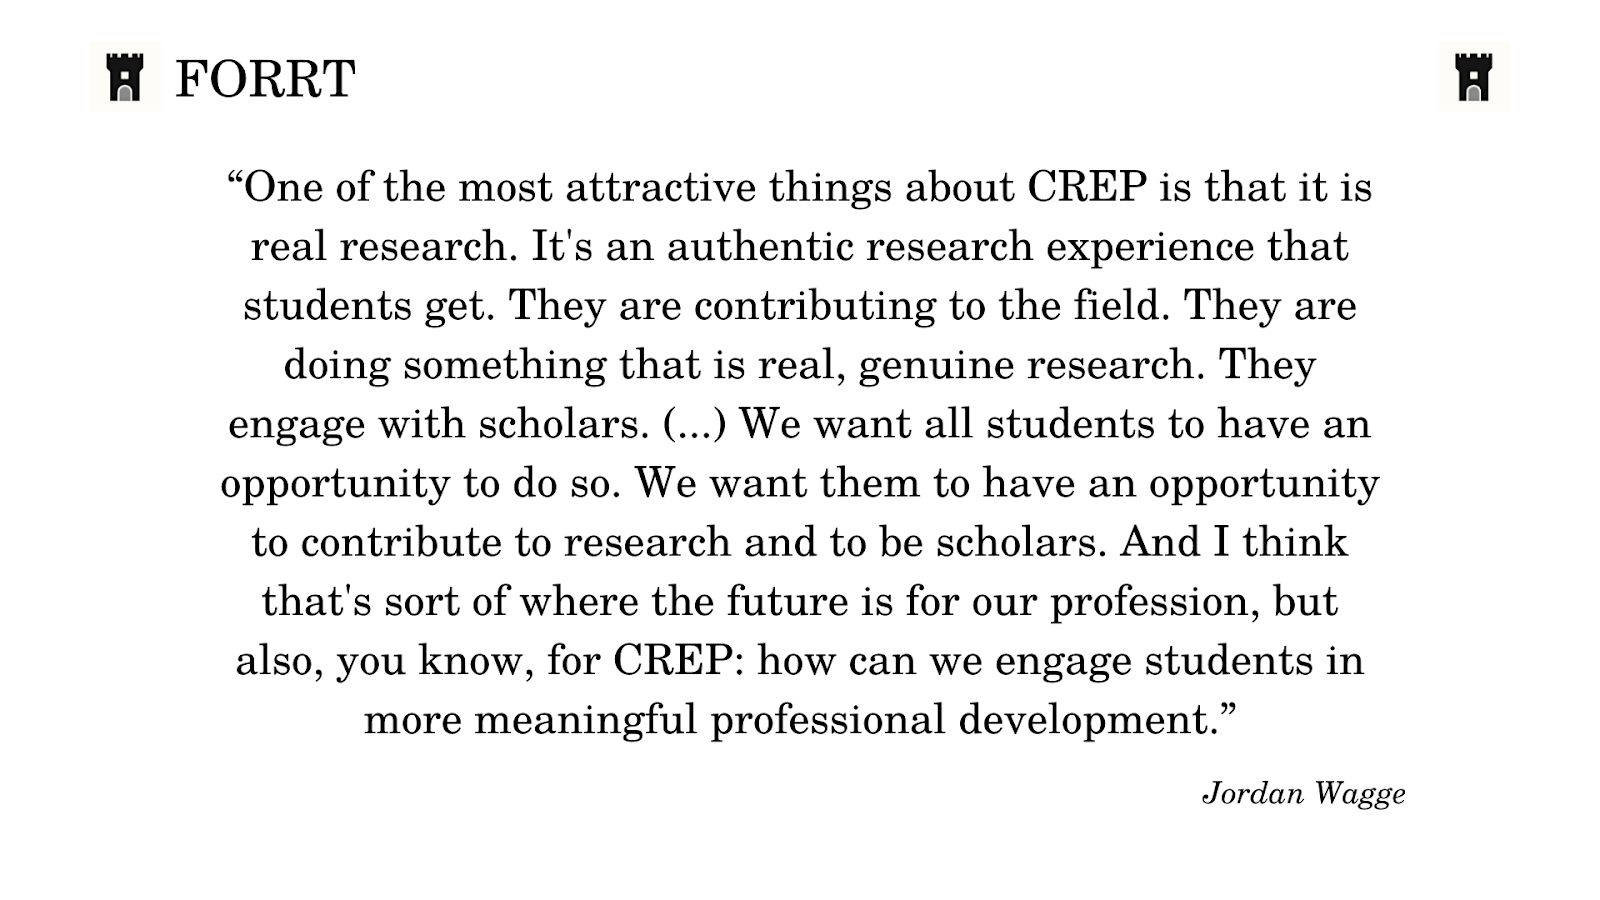 A quote from Jordan Wagge, which says: “One of the most attractive things about CREP is that it is real research. It’s an authentic research experience that students get. They are contributing to the field. They are doing something that is real, genuine research. They engage with scholars. (…) We want all students to have an opportunity to do so. We want them to have an opportunity to contribute to research and to be scholars. And I think that’s sort of where the future is for our profession, but also, you know, for CREP: how can we engage students in a more meaningful professional development.